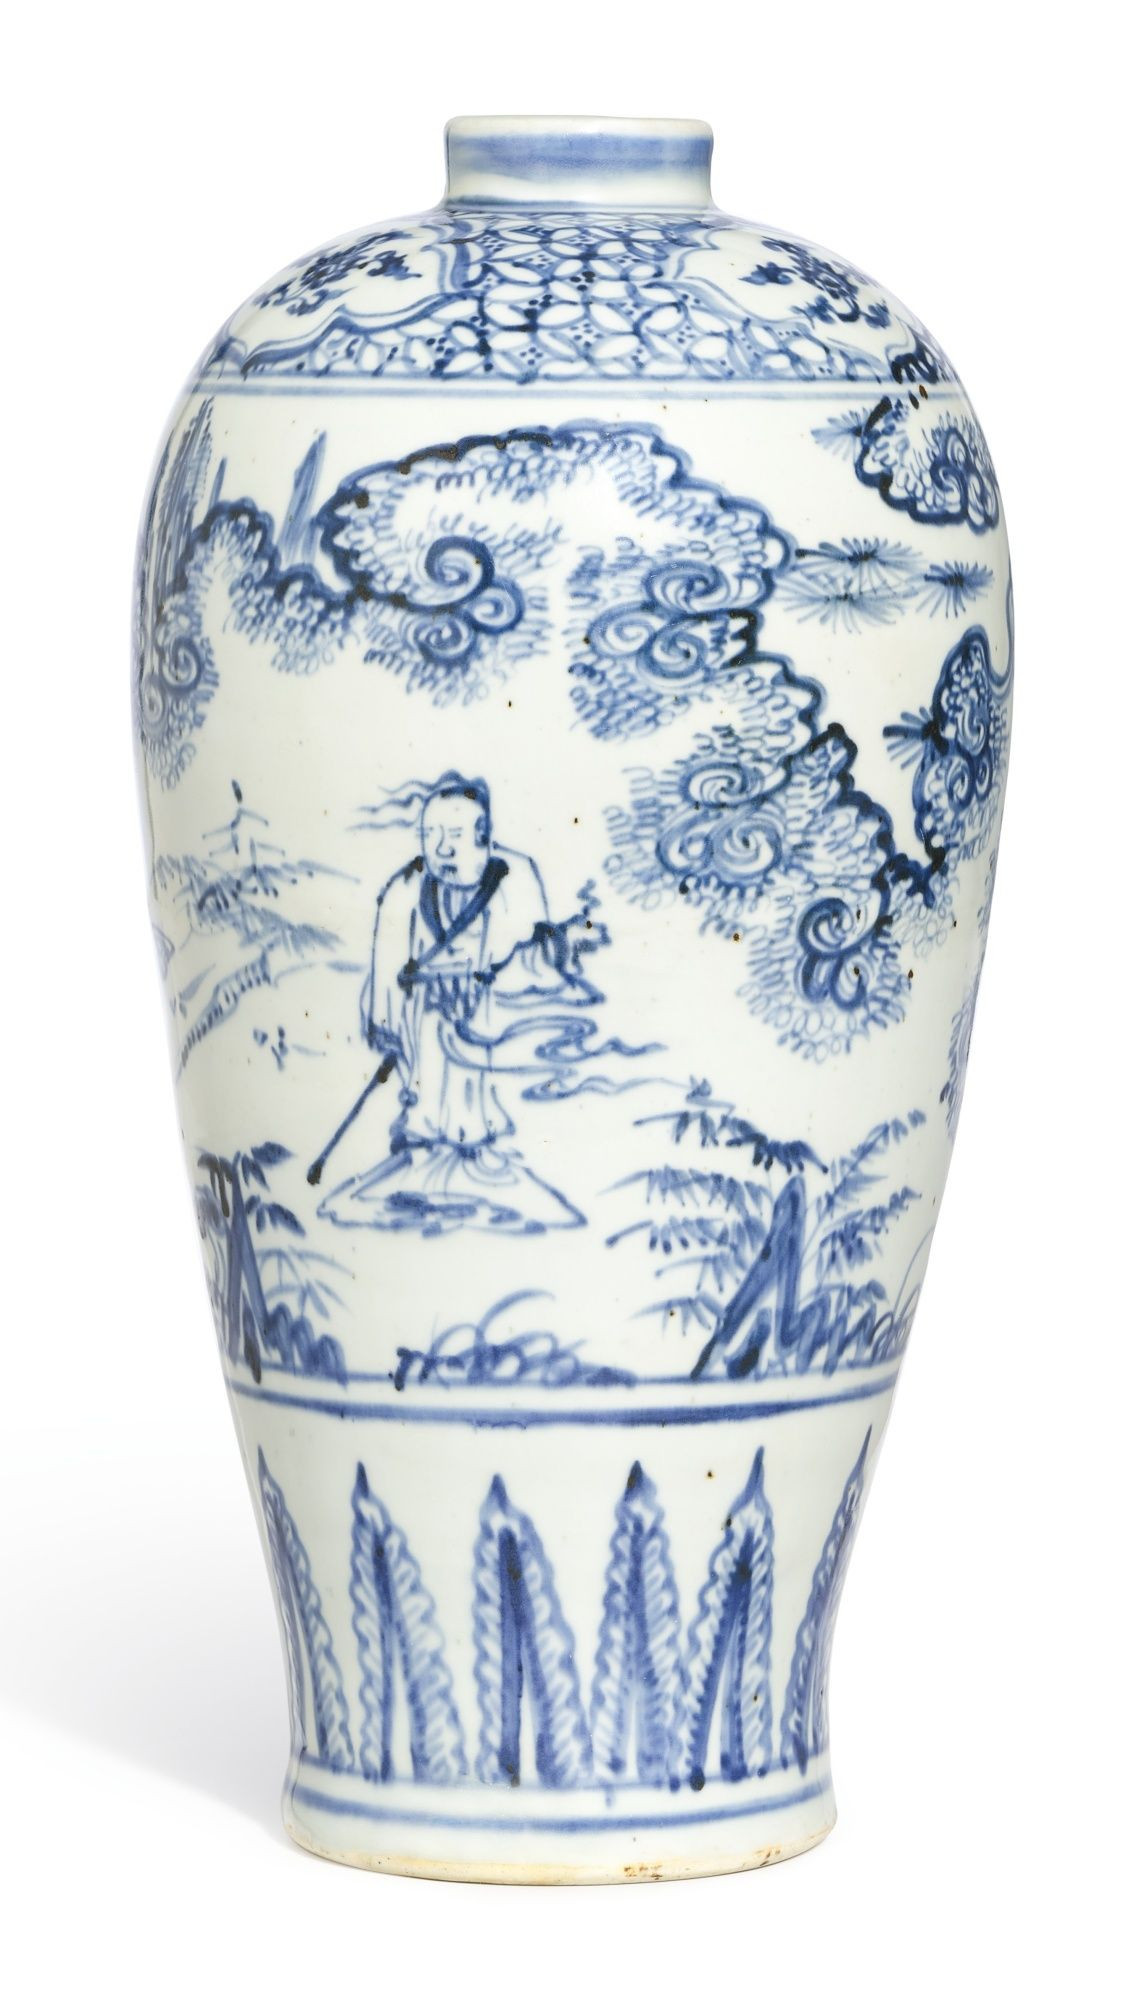 13 Awesome Mccoy Green Vase 2024 free download mccoy green vase of antique white vase photos 8682h vases plastic pedestal vase glass within antique white vase pics a blue and white figure meiping br ming dynasty 15th century of